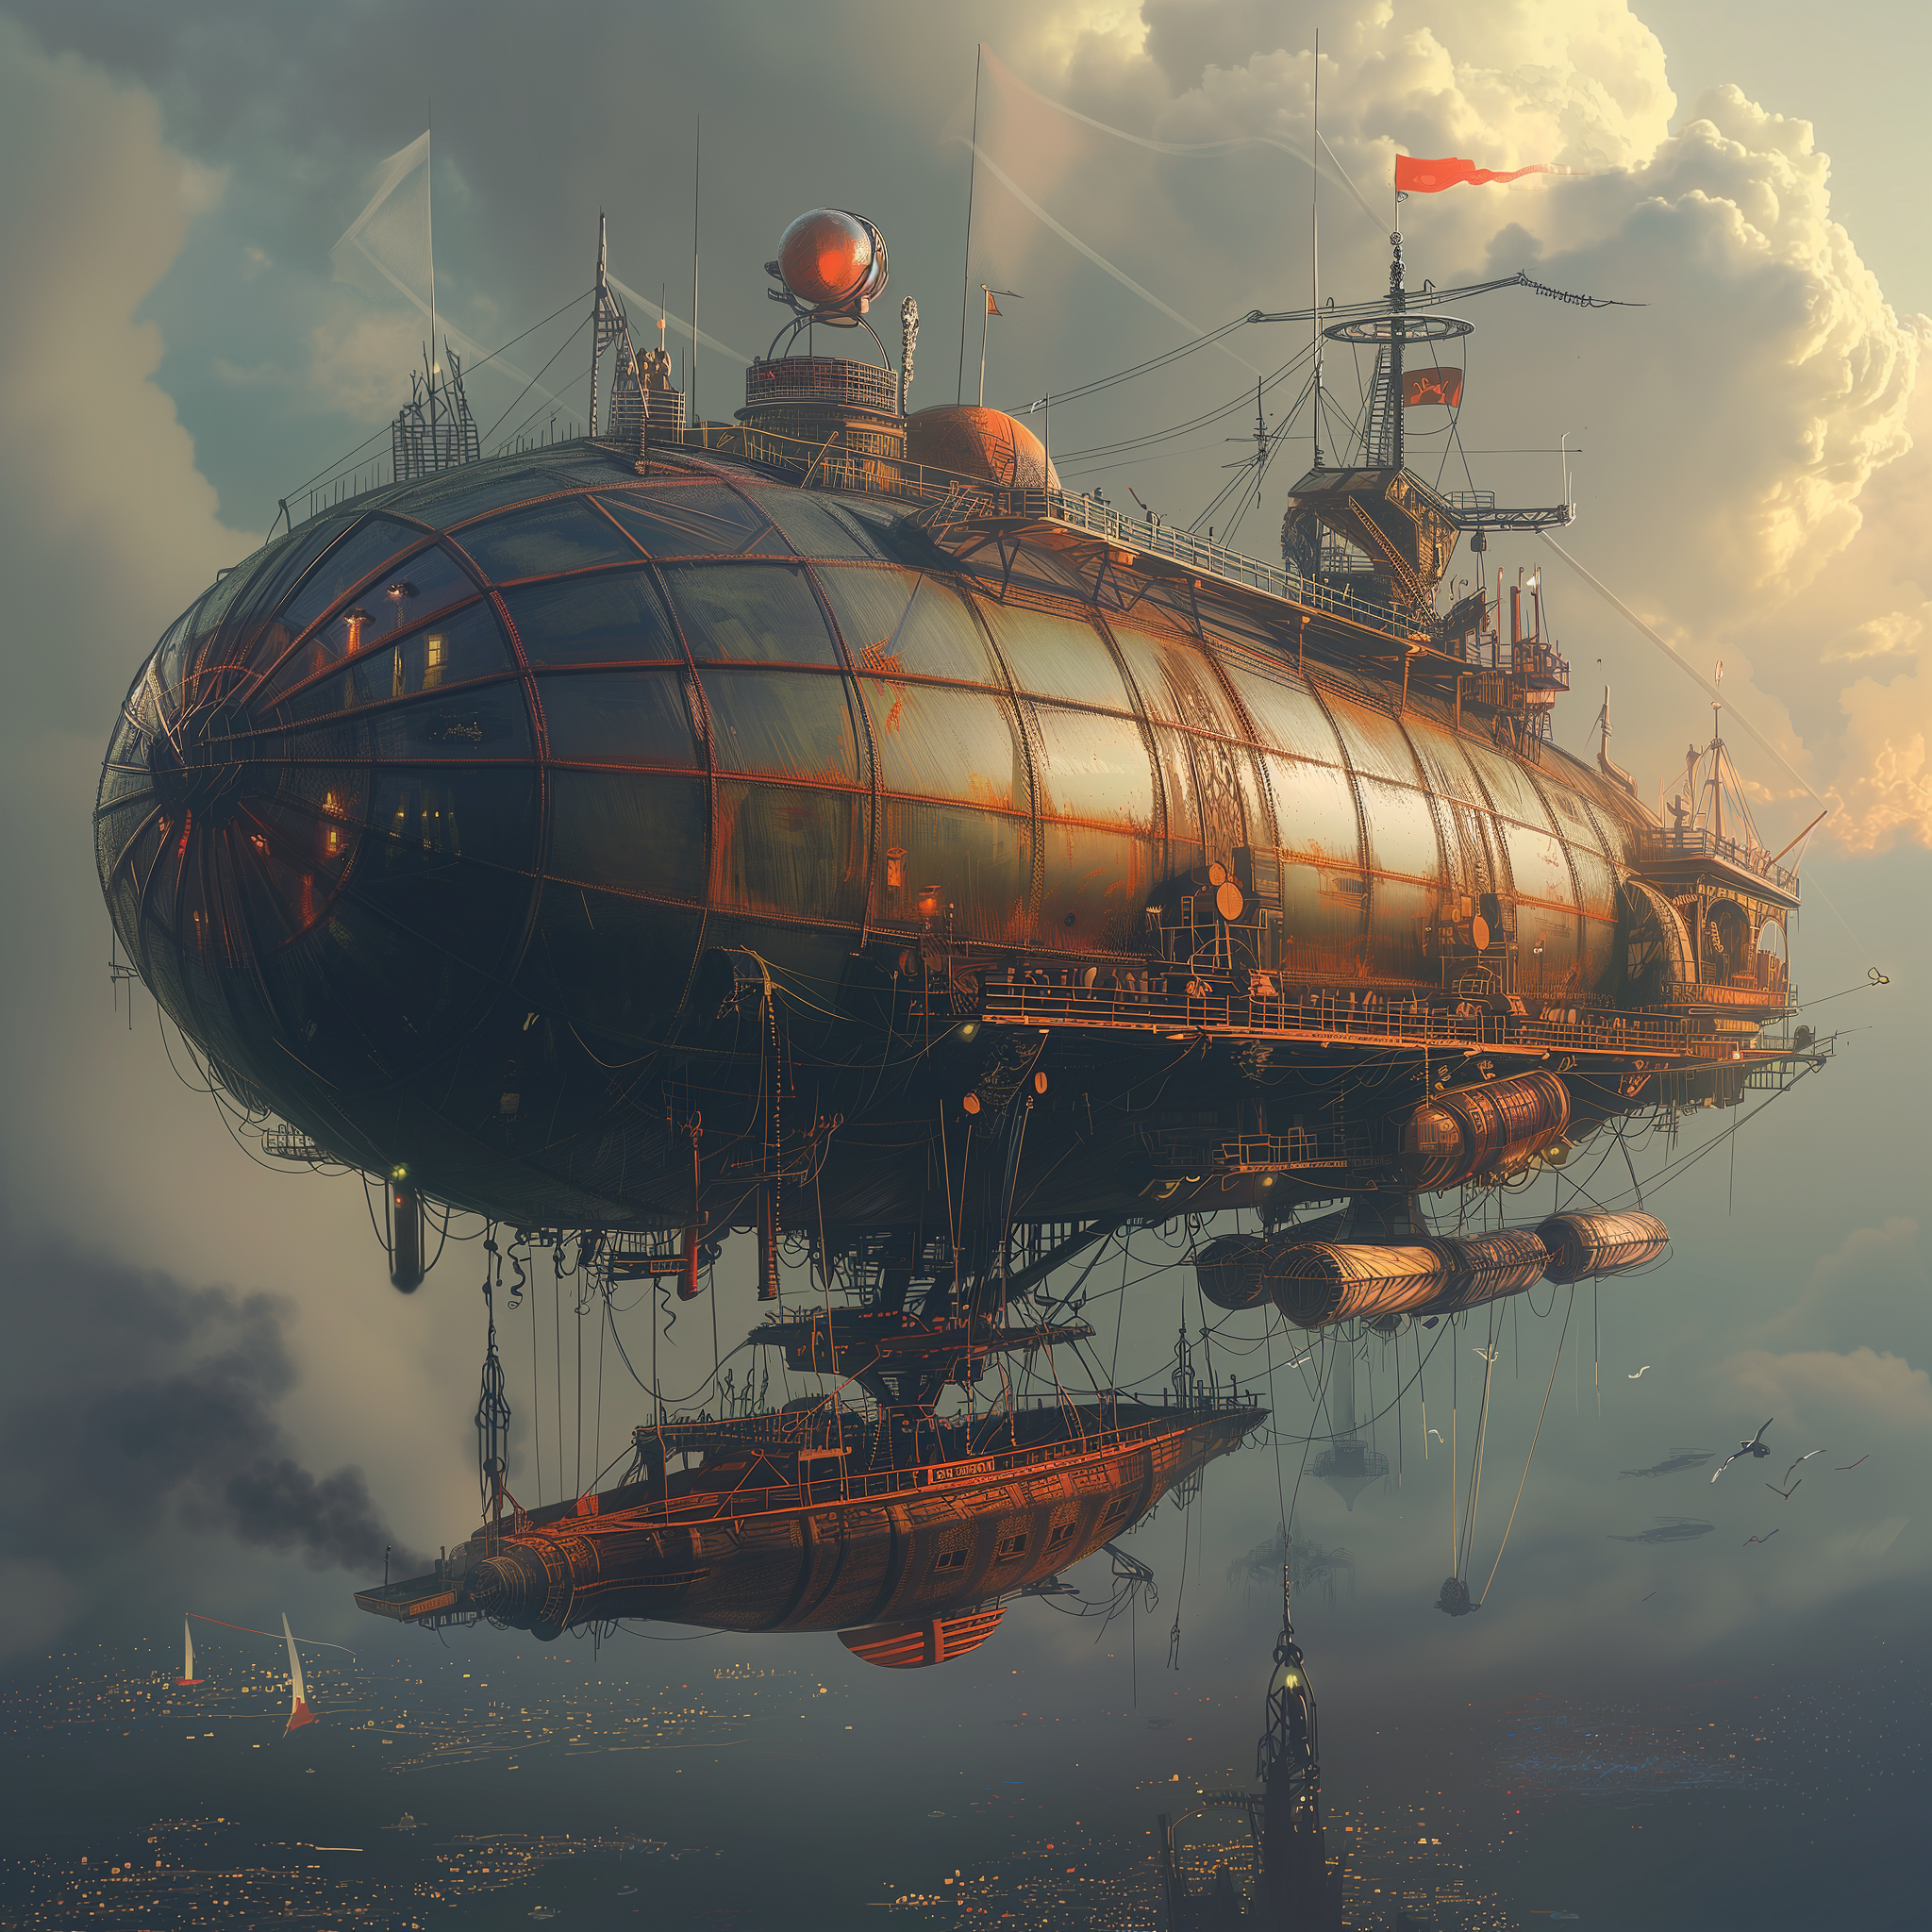 Steampunk-style airship avatar with intricate designs floating against a dramatic sky backdrop, perfect for a profile picture.